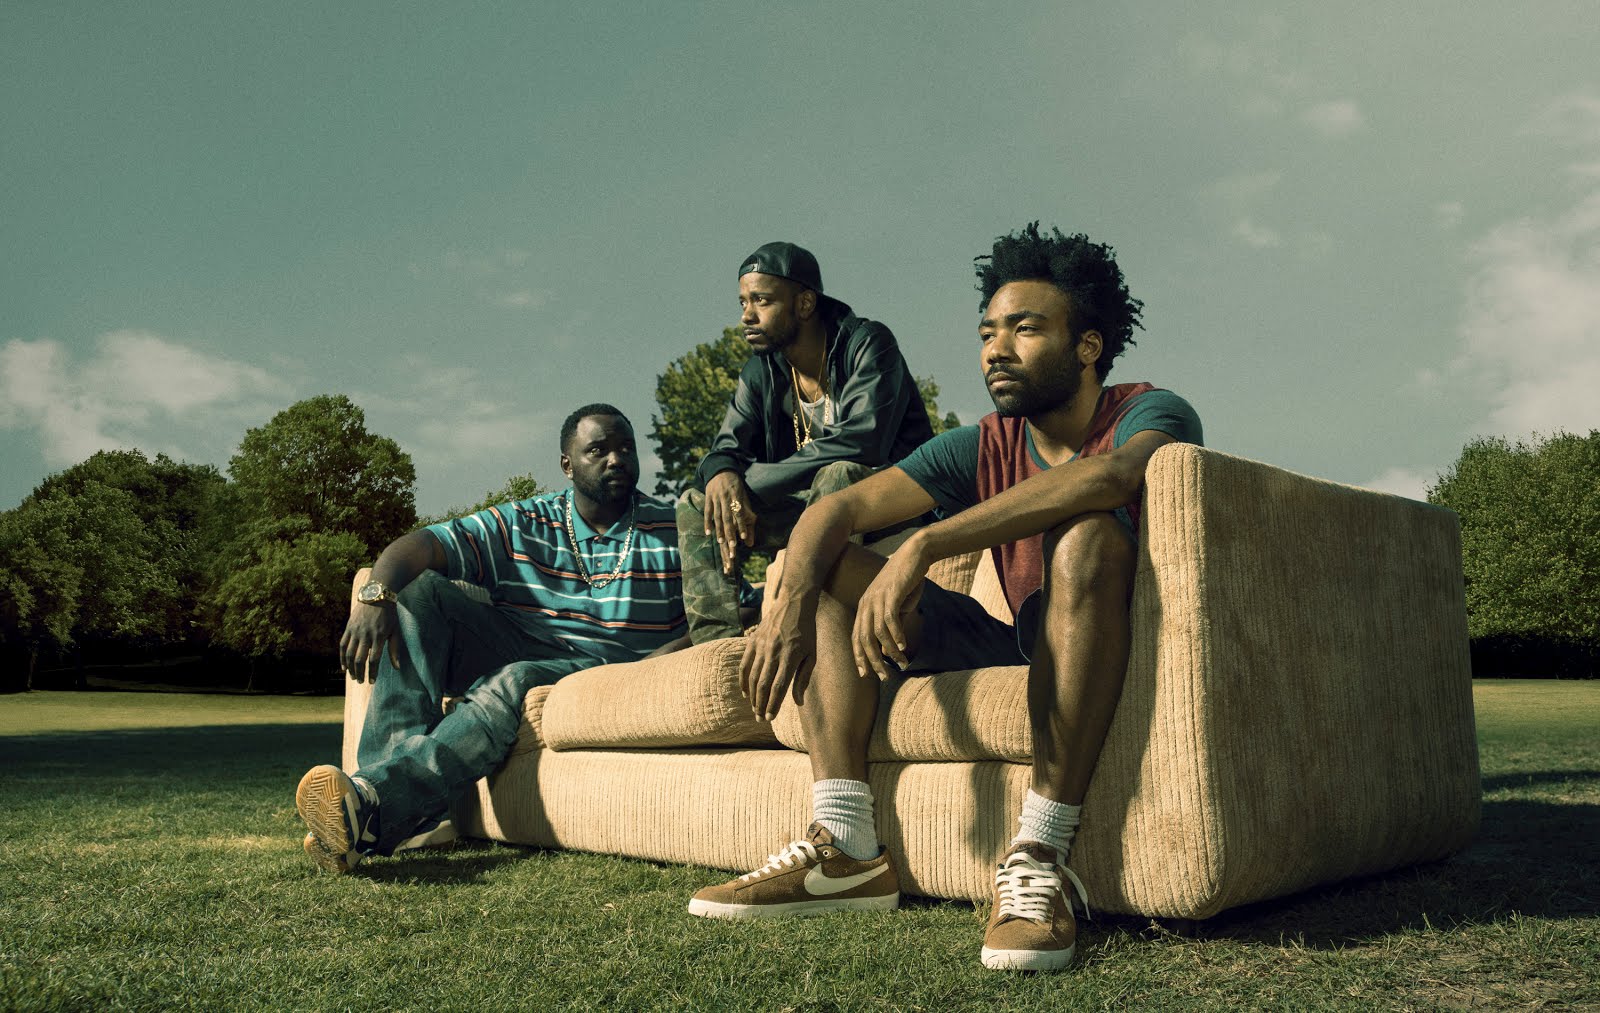 Why Donald Glover’s “Atlanta” Is So Important